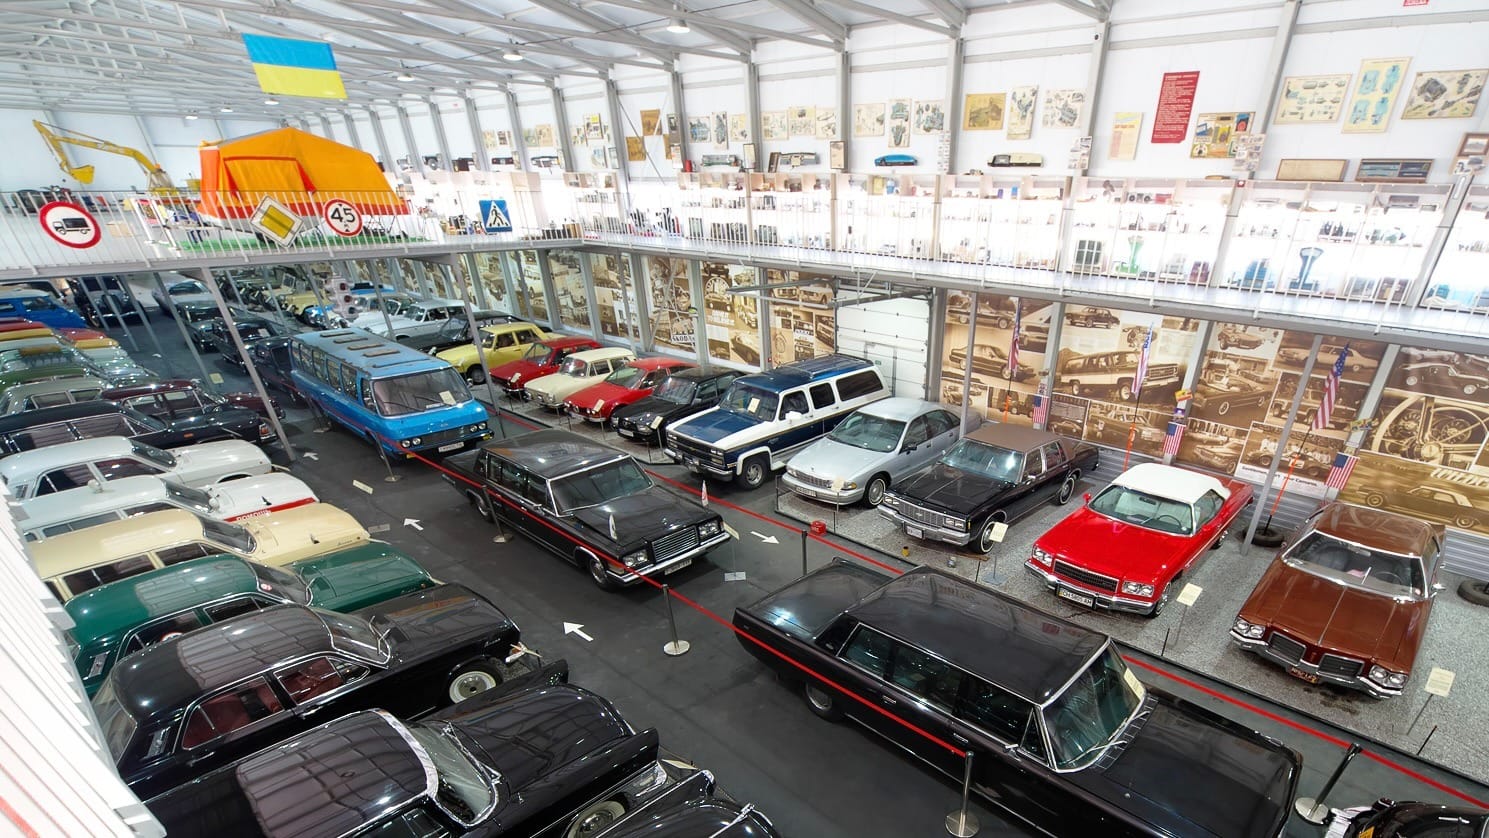 In Kyiv, the city's only museum of retro technology, "Wheels of History," was opened